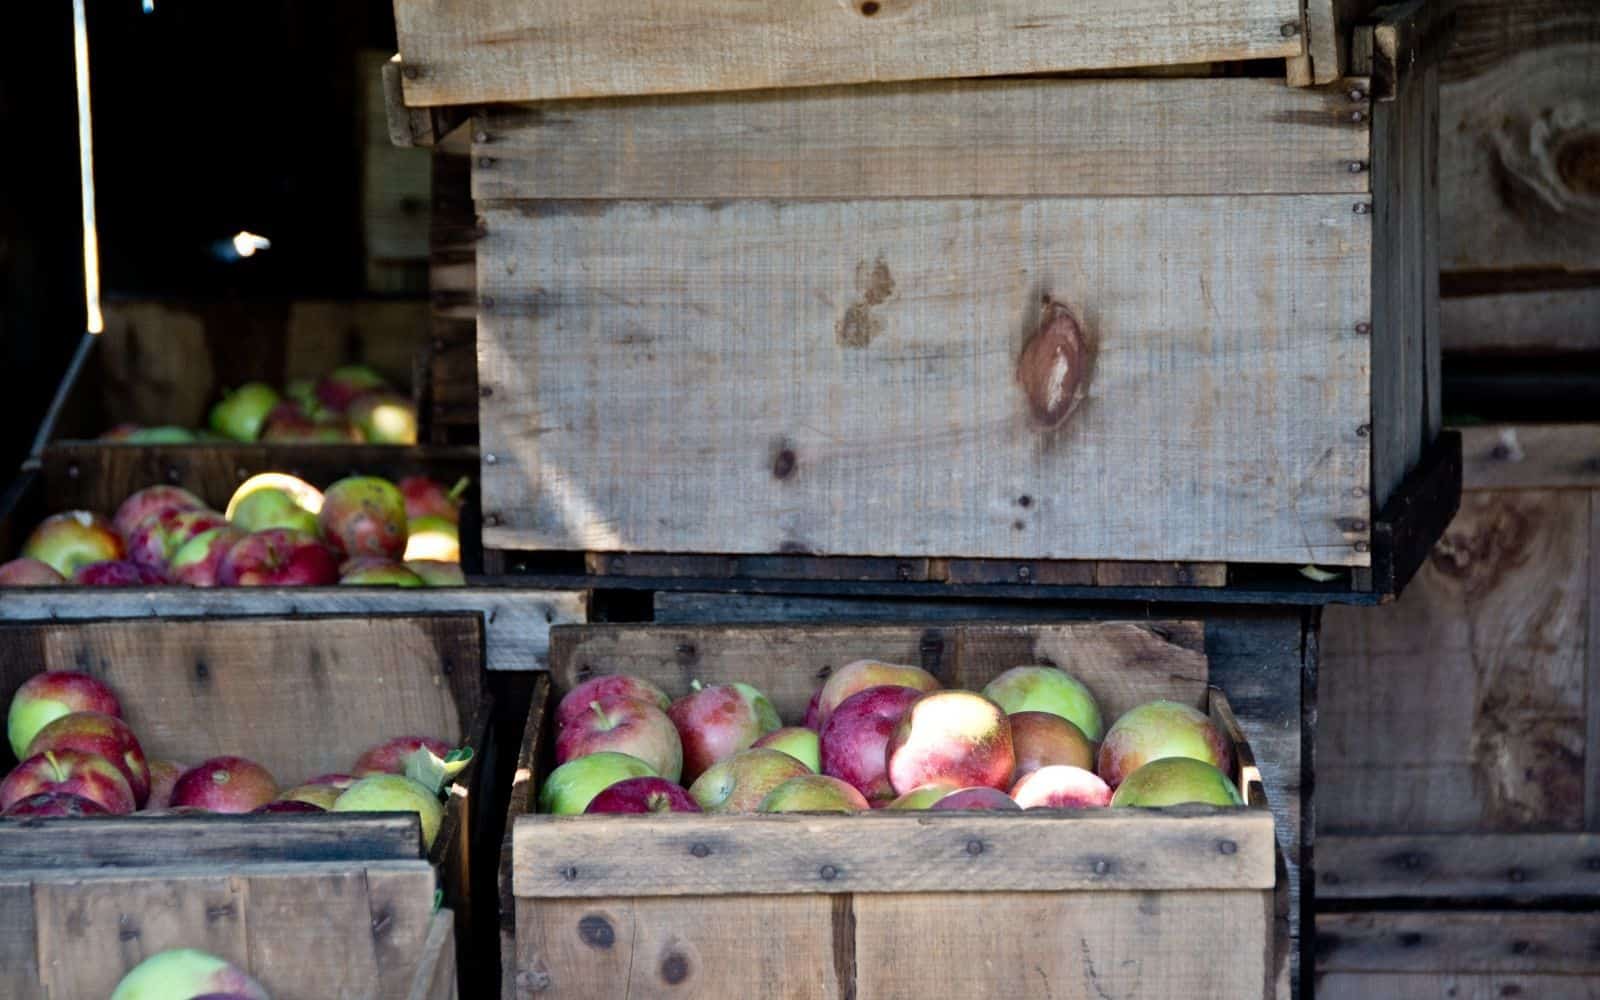 Macoun apple harvest in wooden farm crates